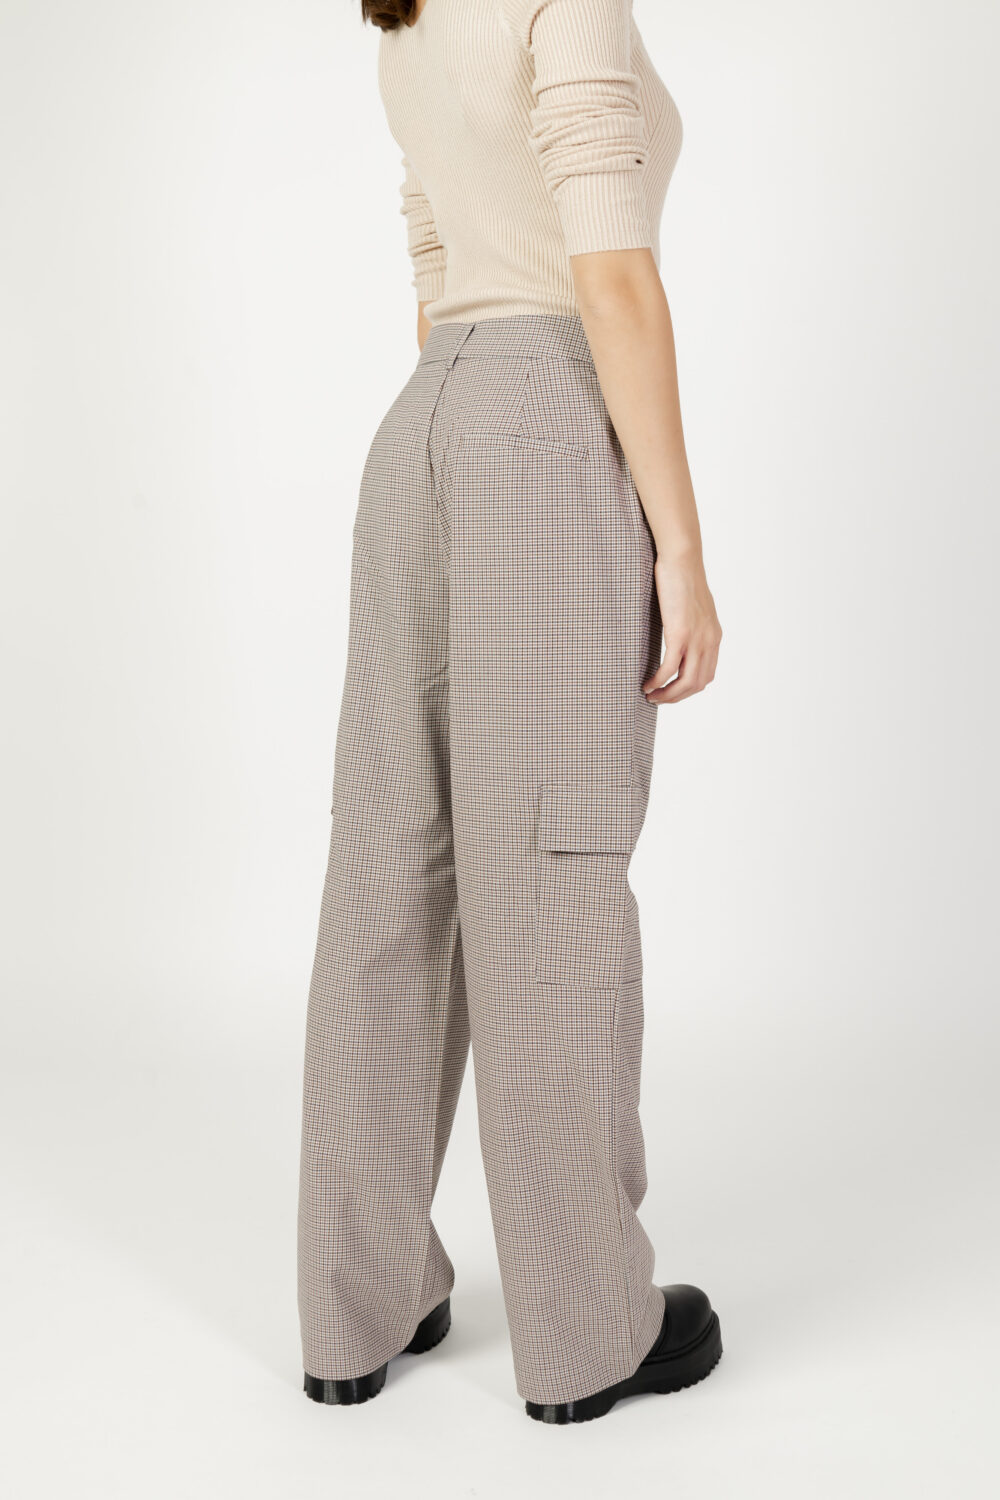 Pantaloni a sigaretta Only onljoss hw straight cargo check pant tlr Beige chiaro - Foto 3